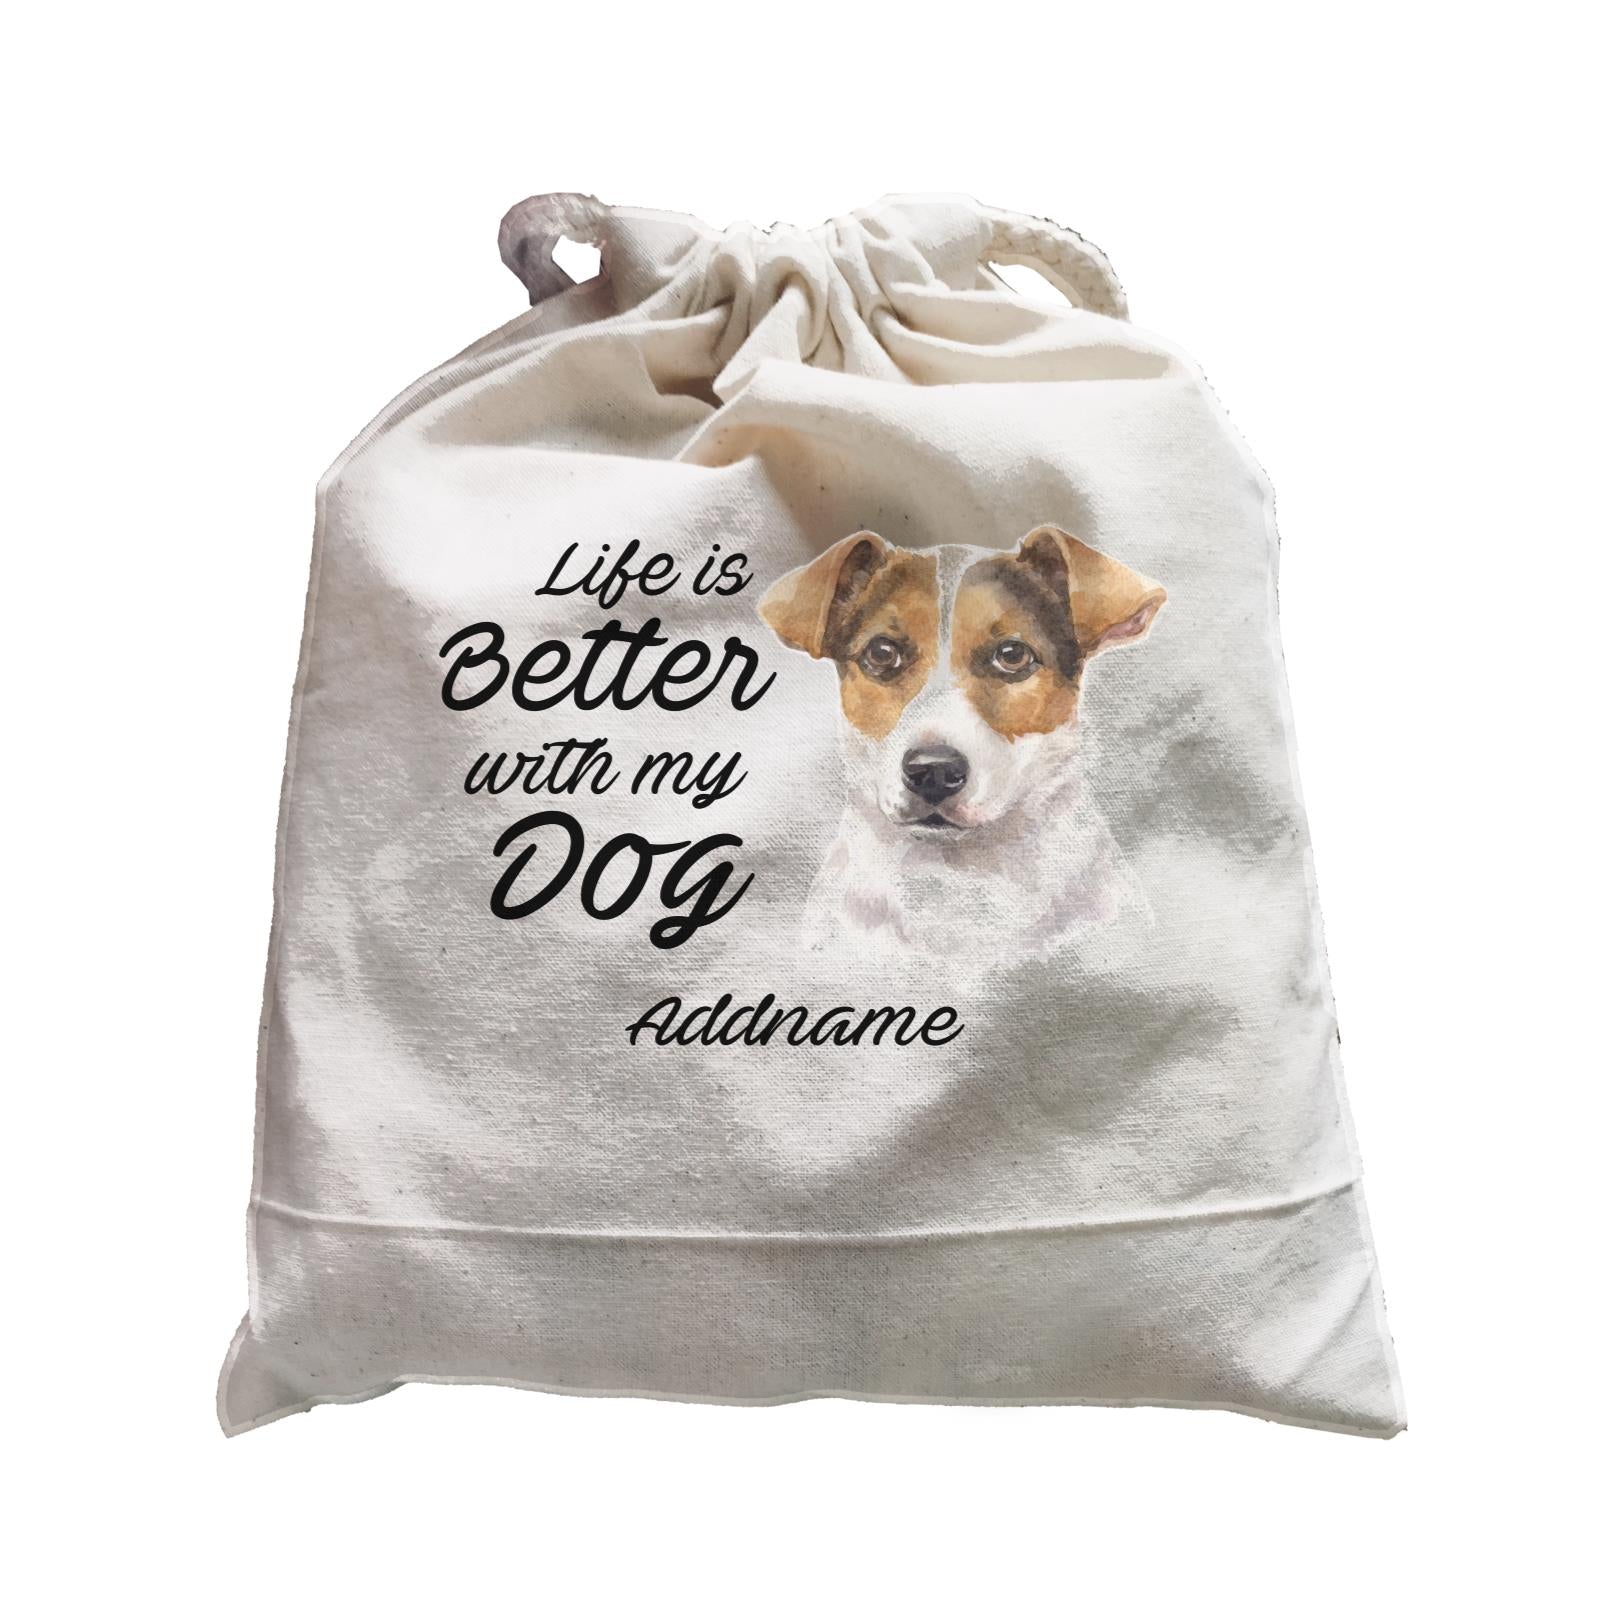 Watercolor Life is Better With My Dog Jack Russell Short Hair Addname Satchel